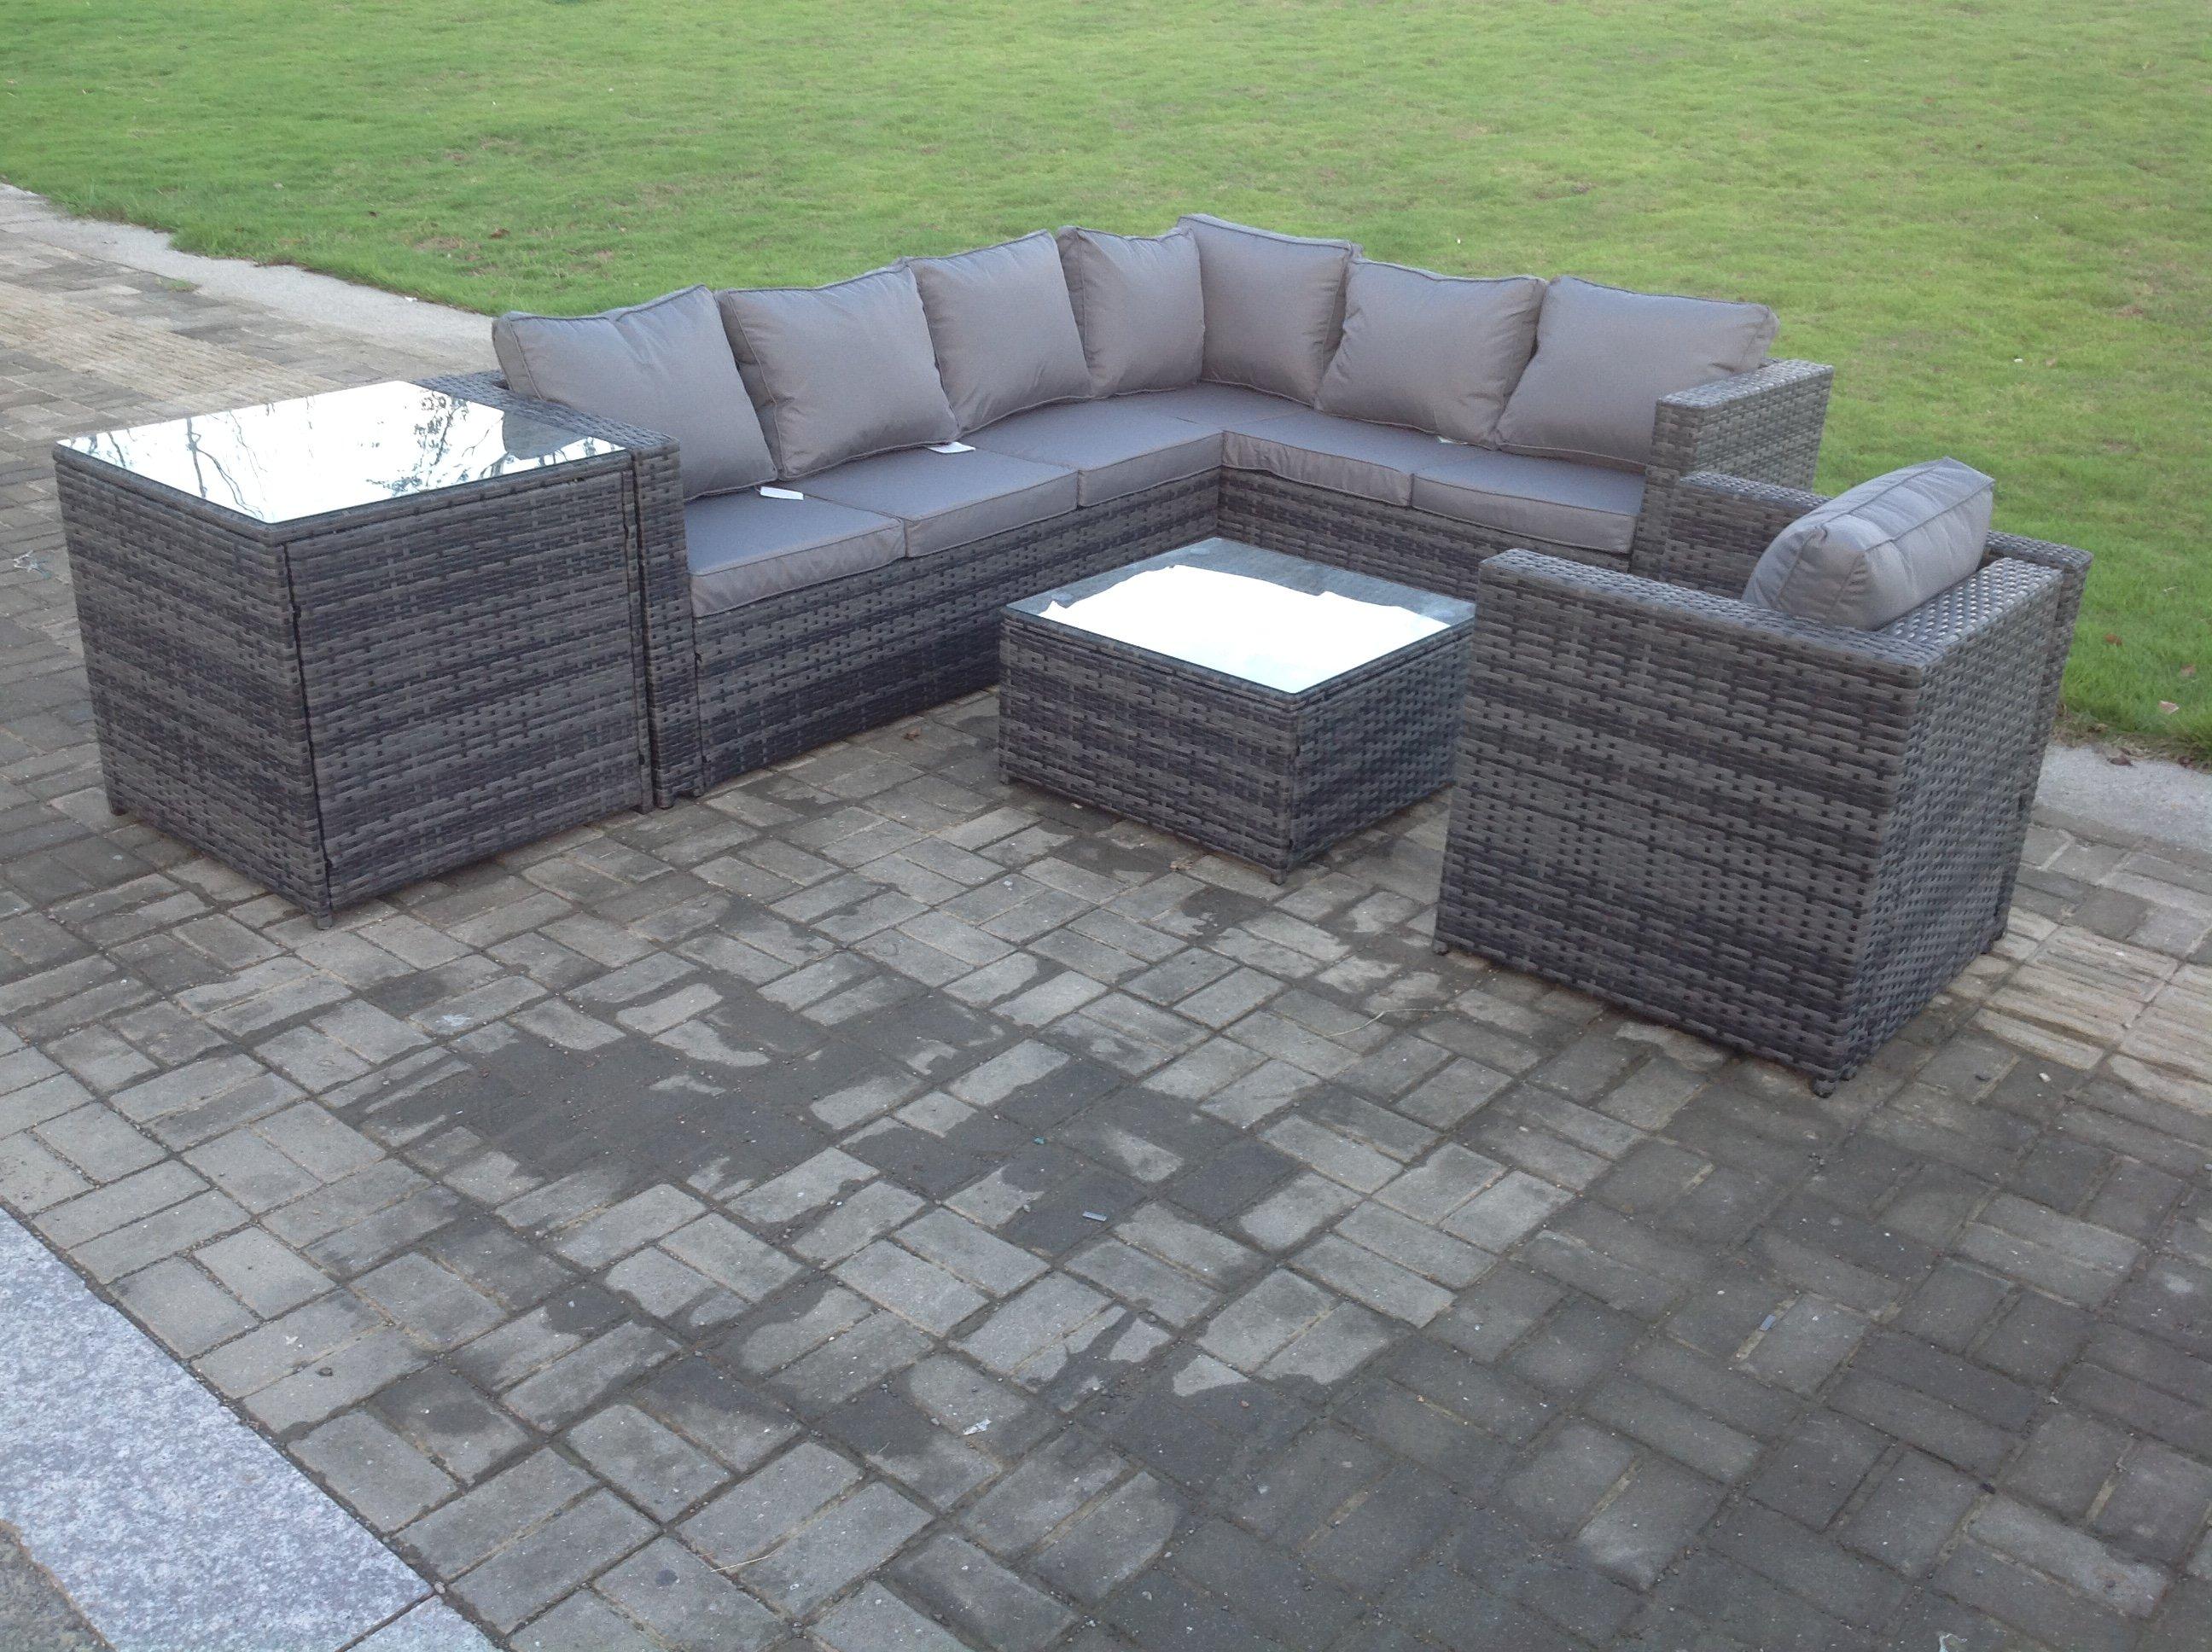 Rattan Corner Sofa Set Garden Furniture With Chair Coffee Table And Side Table